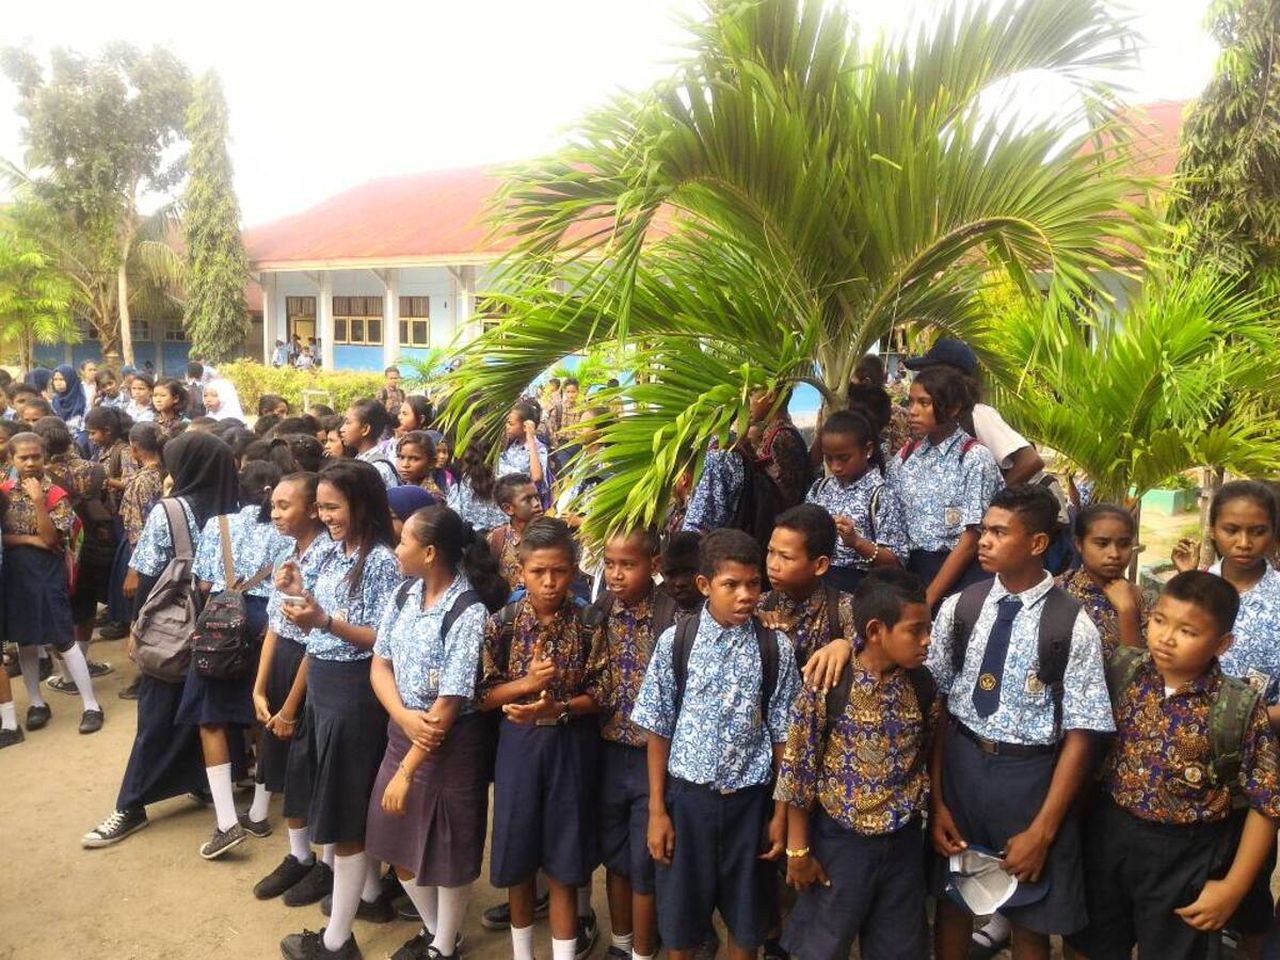 KOMPAS/ESTER LINCE NAPITUPULU New students in elementary, junior high, and senior high/vocational schools starting from this academic year will be given priority to be accepted in schools closest to their residence. Seen in the picture, students in the Aru Islands, Maluku, gather in the school yard some time ago.